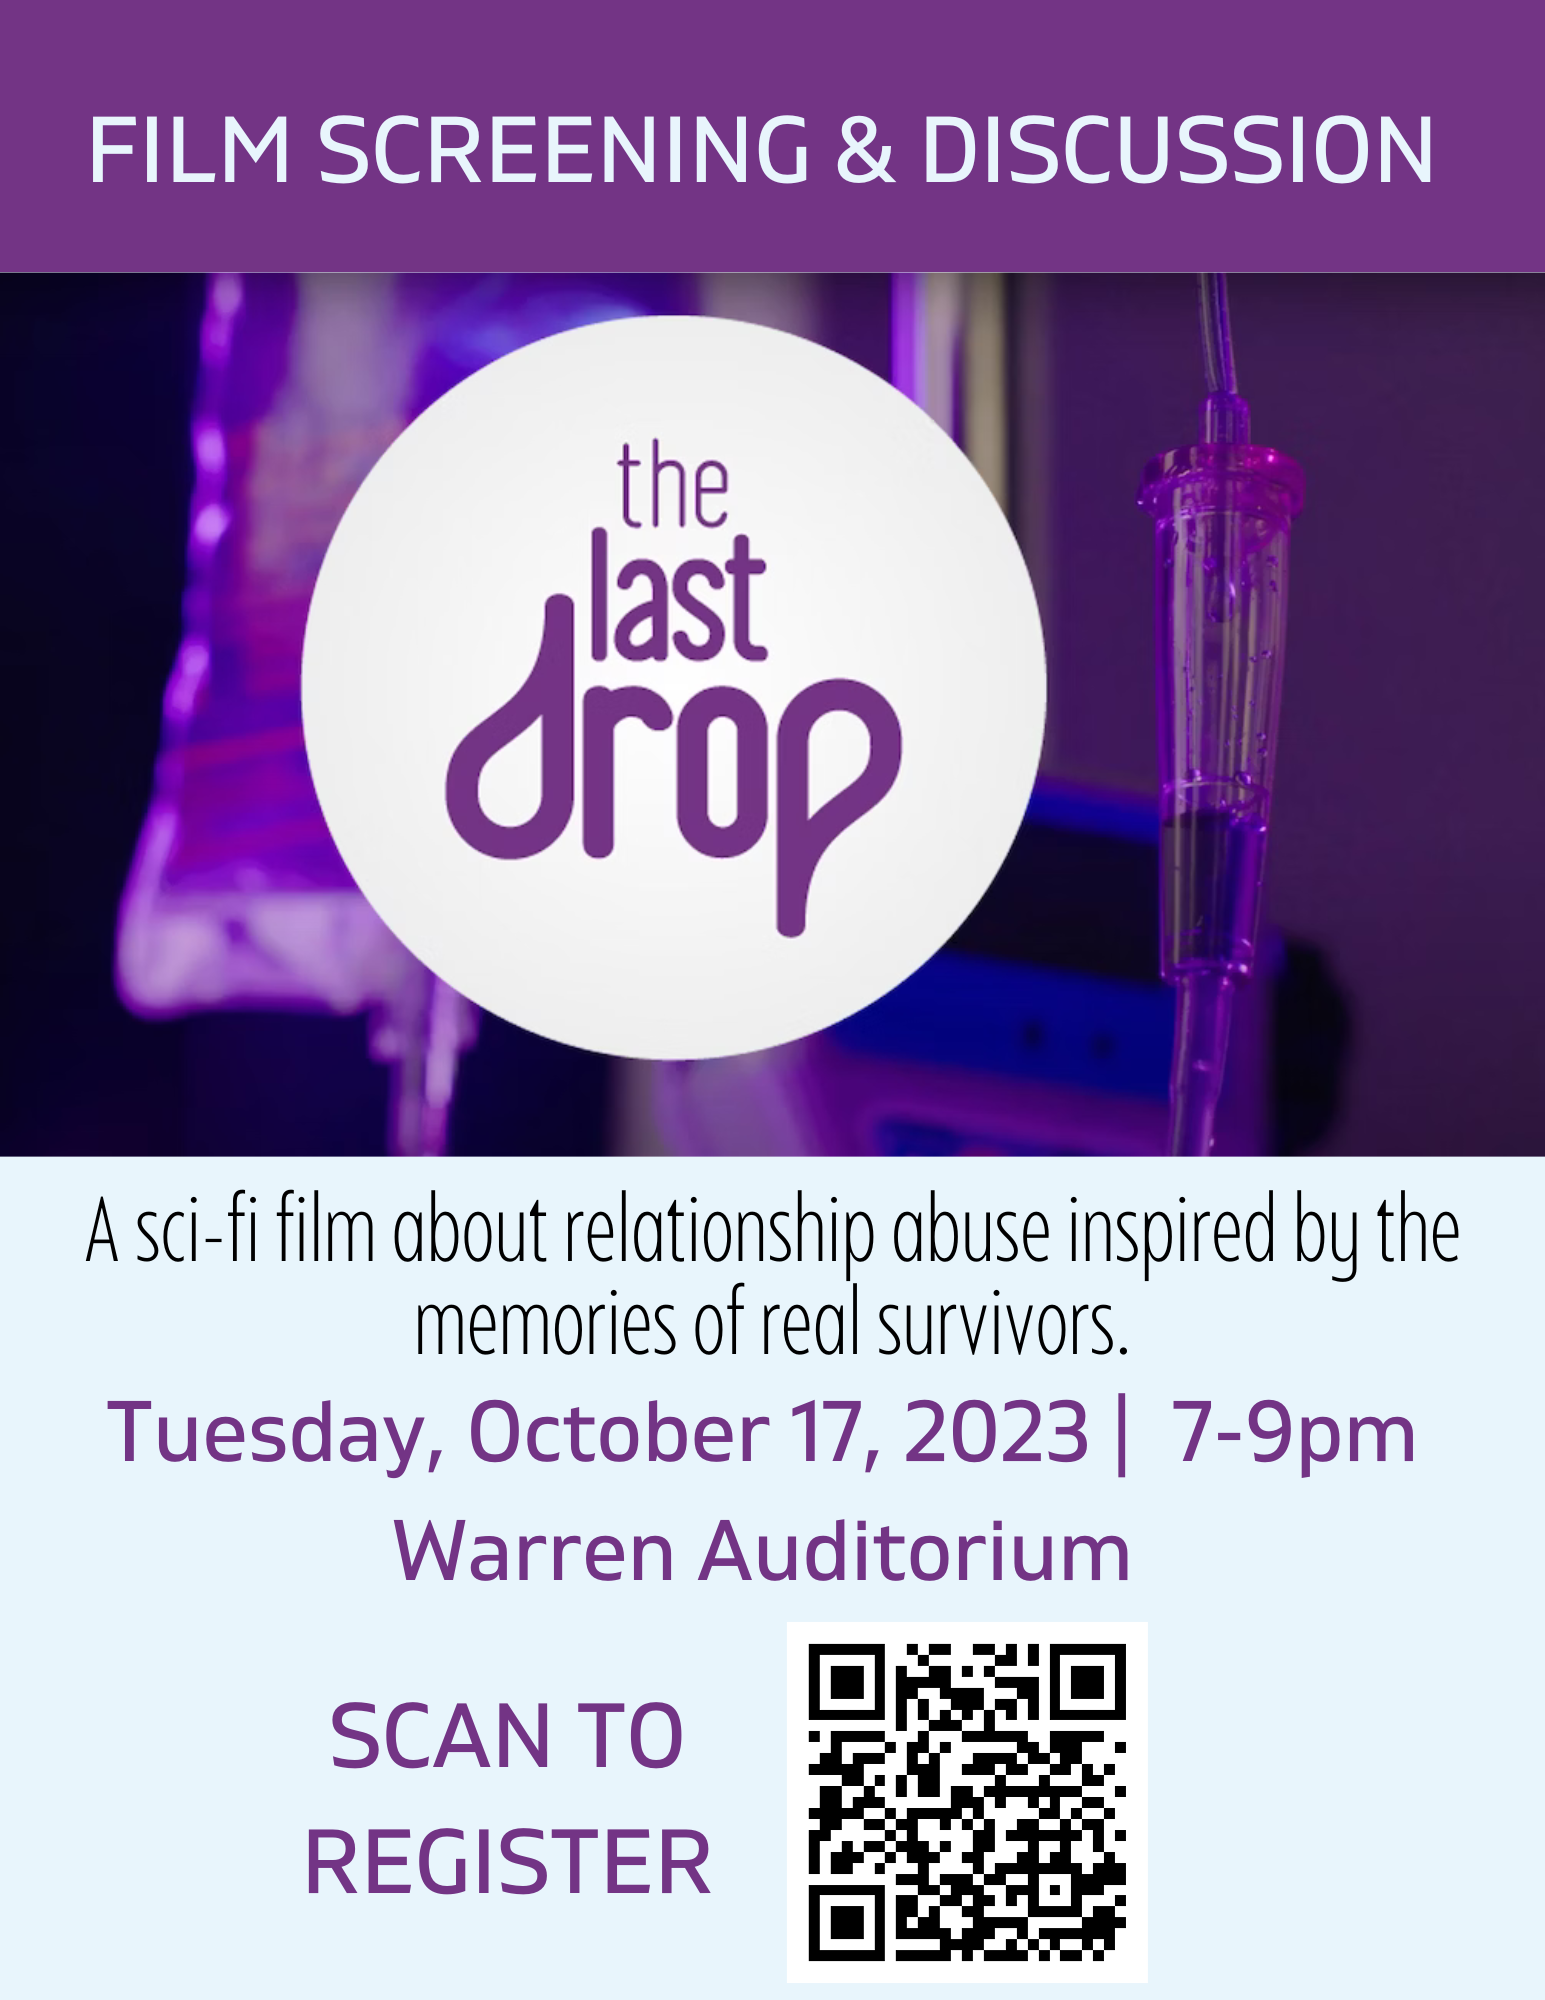 On a dark purple background, the following text is on the top of the page: "Film Screening and Discussion".  The Last Drop Film cover/logo lies below this. On a light blue background covering the lower half of the page, the following text is printed in black:  "A sci-fi film about relationship abuse inspired by the memories of real survivors." ;  "Tuesday, October 17, 2023 |  7-9pm Warren Auditorium" ; "Scan to register" (with a QR code linked to the registration form on the right side of the text).